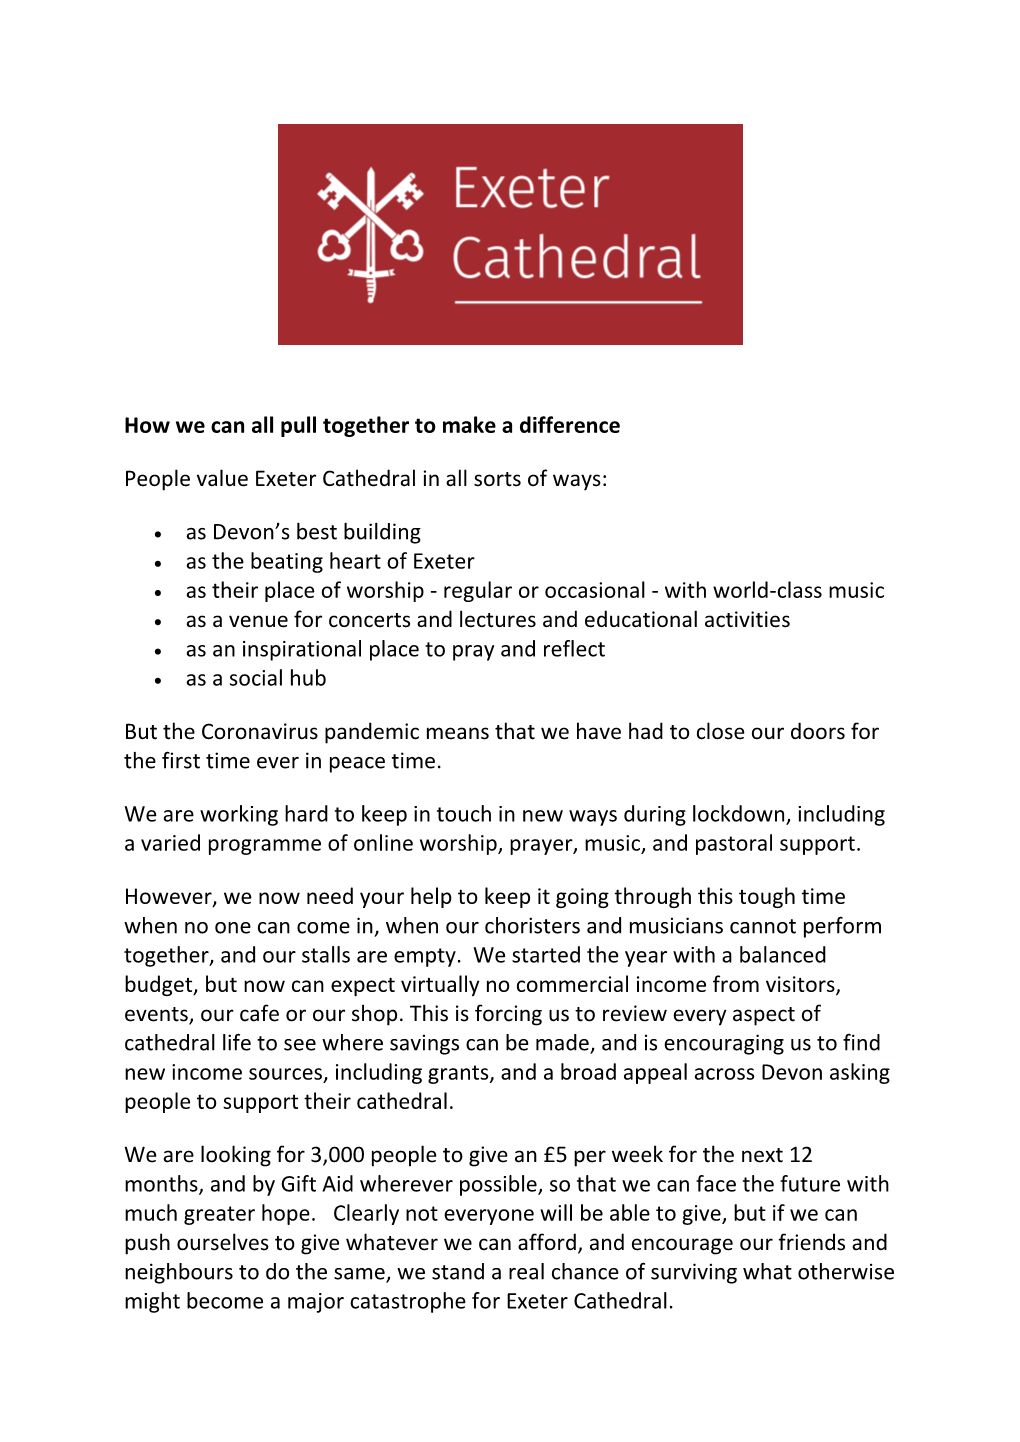 Letter from Exeter Cathedral Dean May 2020